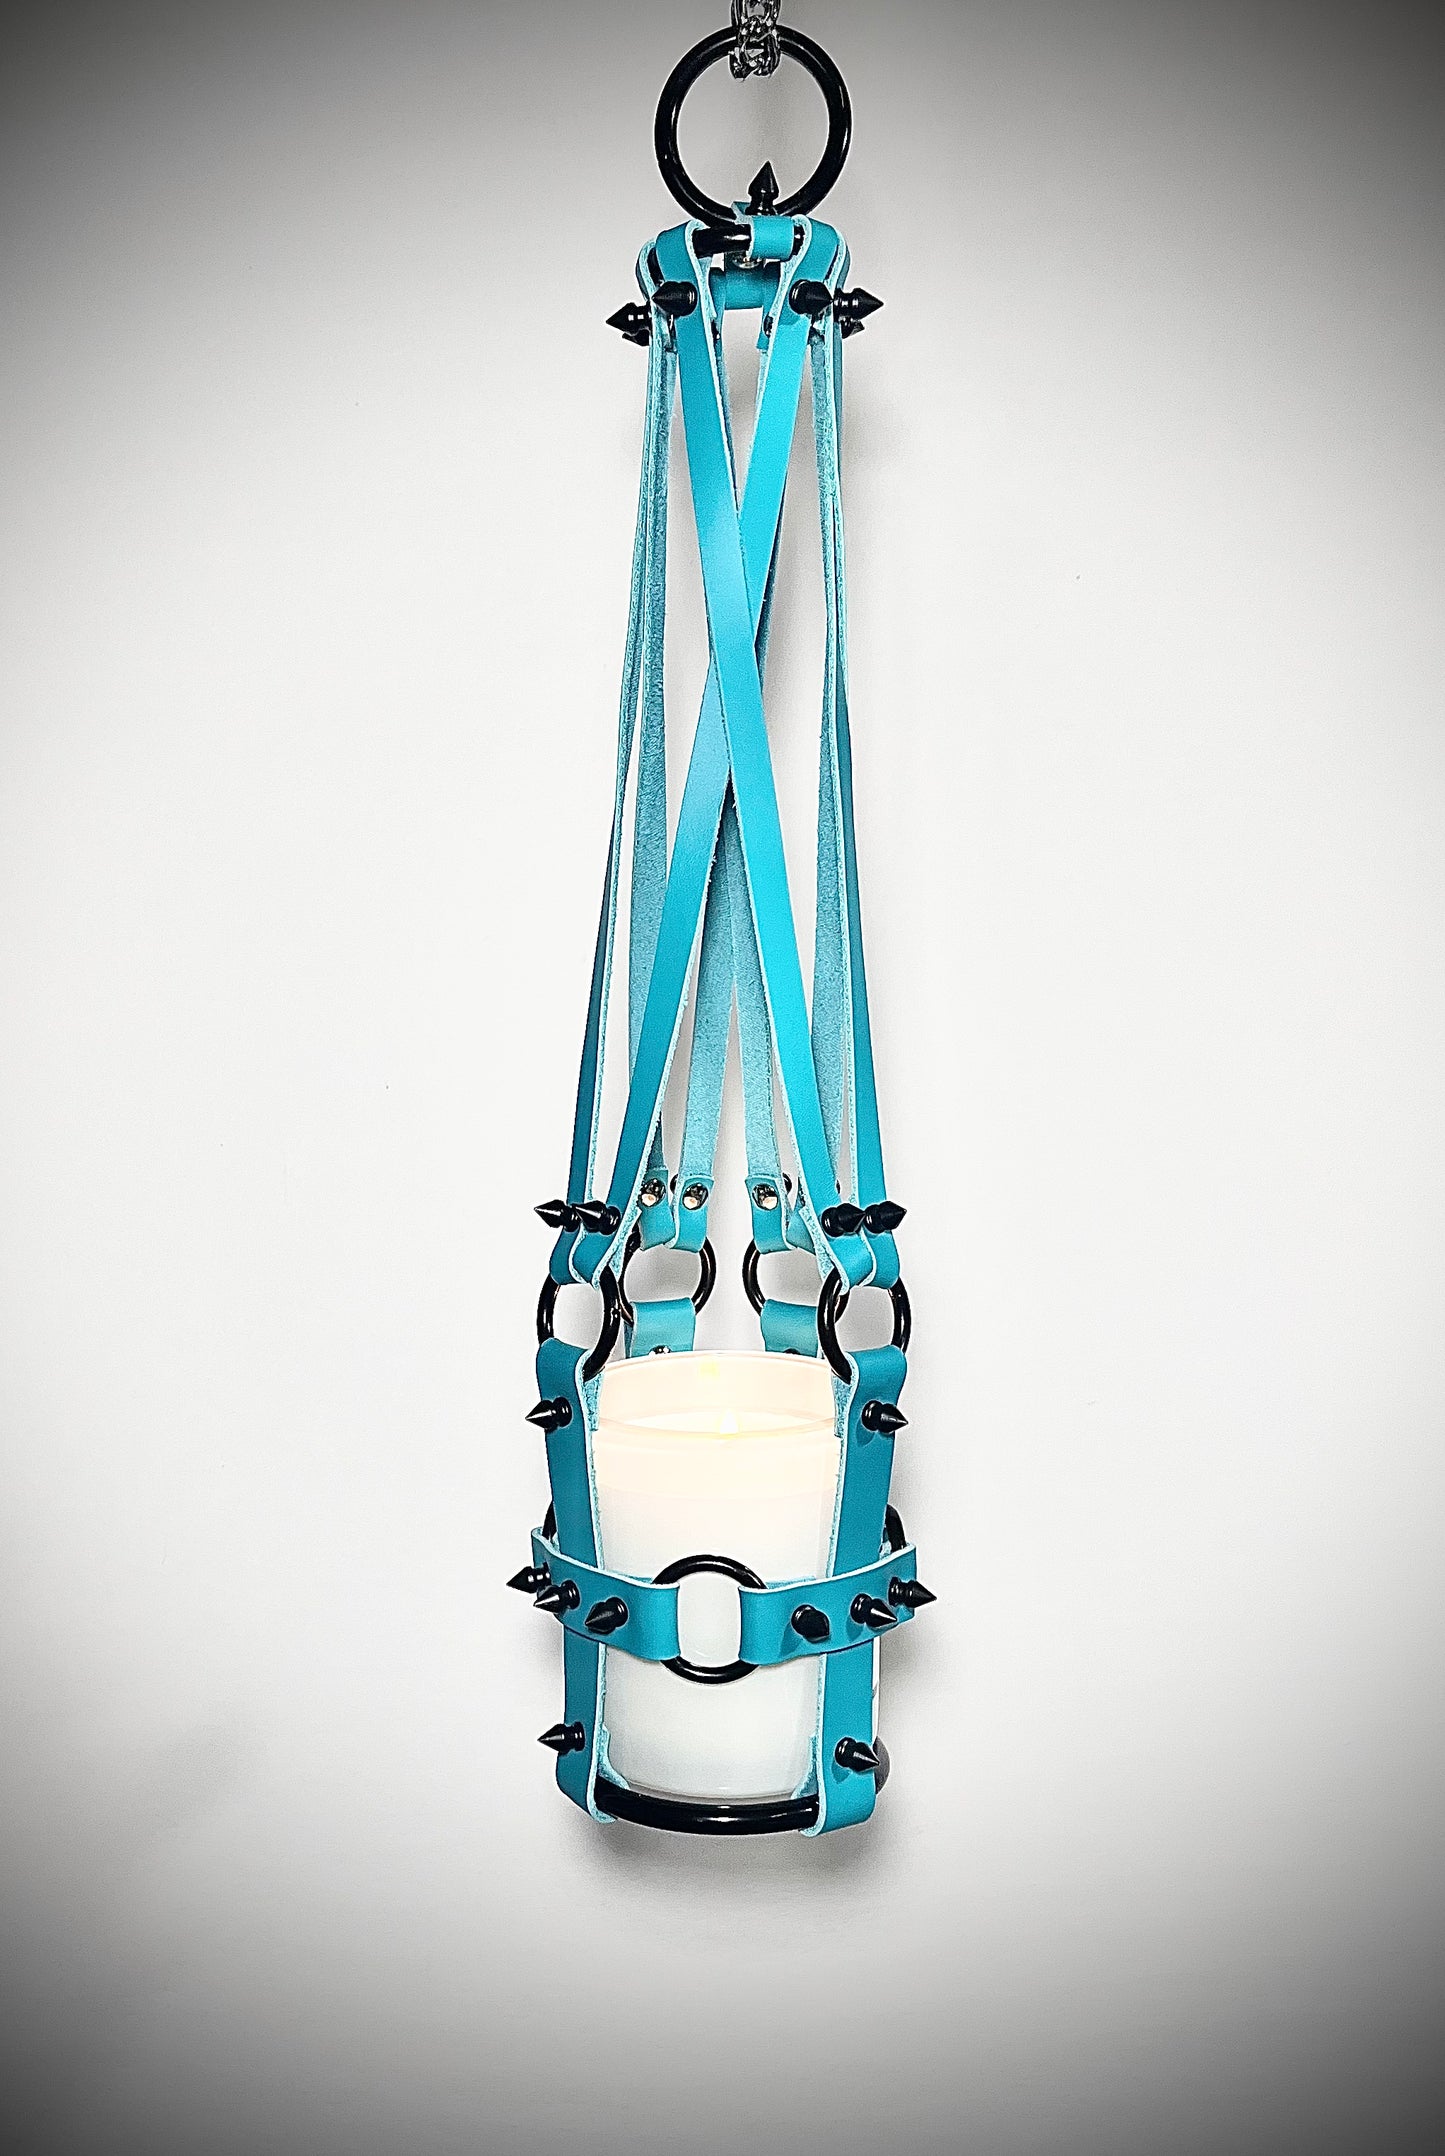 Little Leather Daddy 4" Plant Hanger in Turquoise